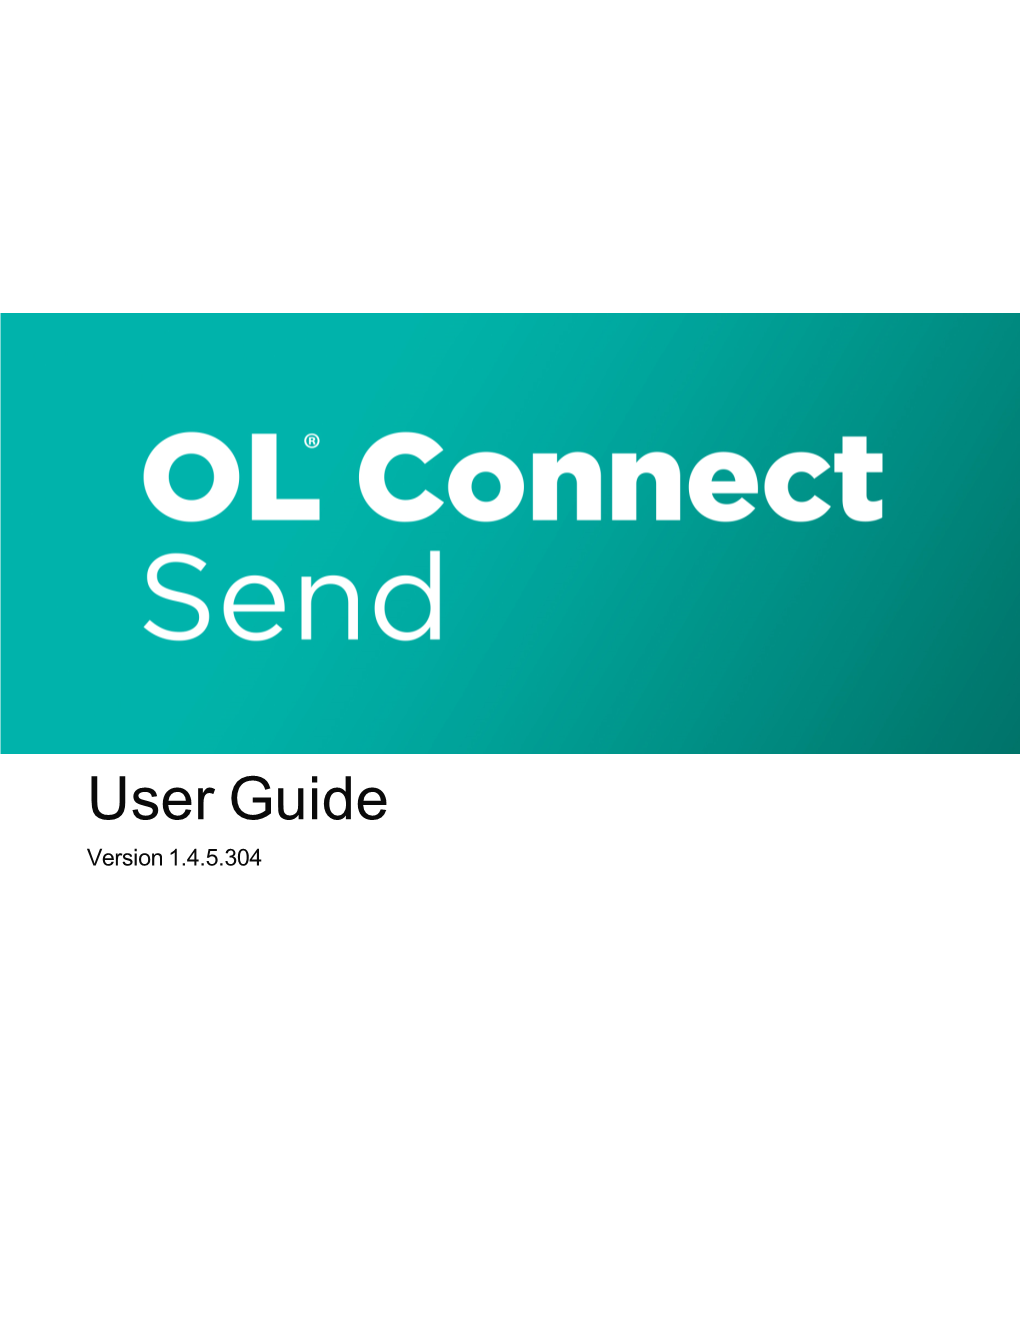 OL Connect Send User Guide